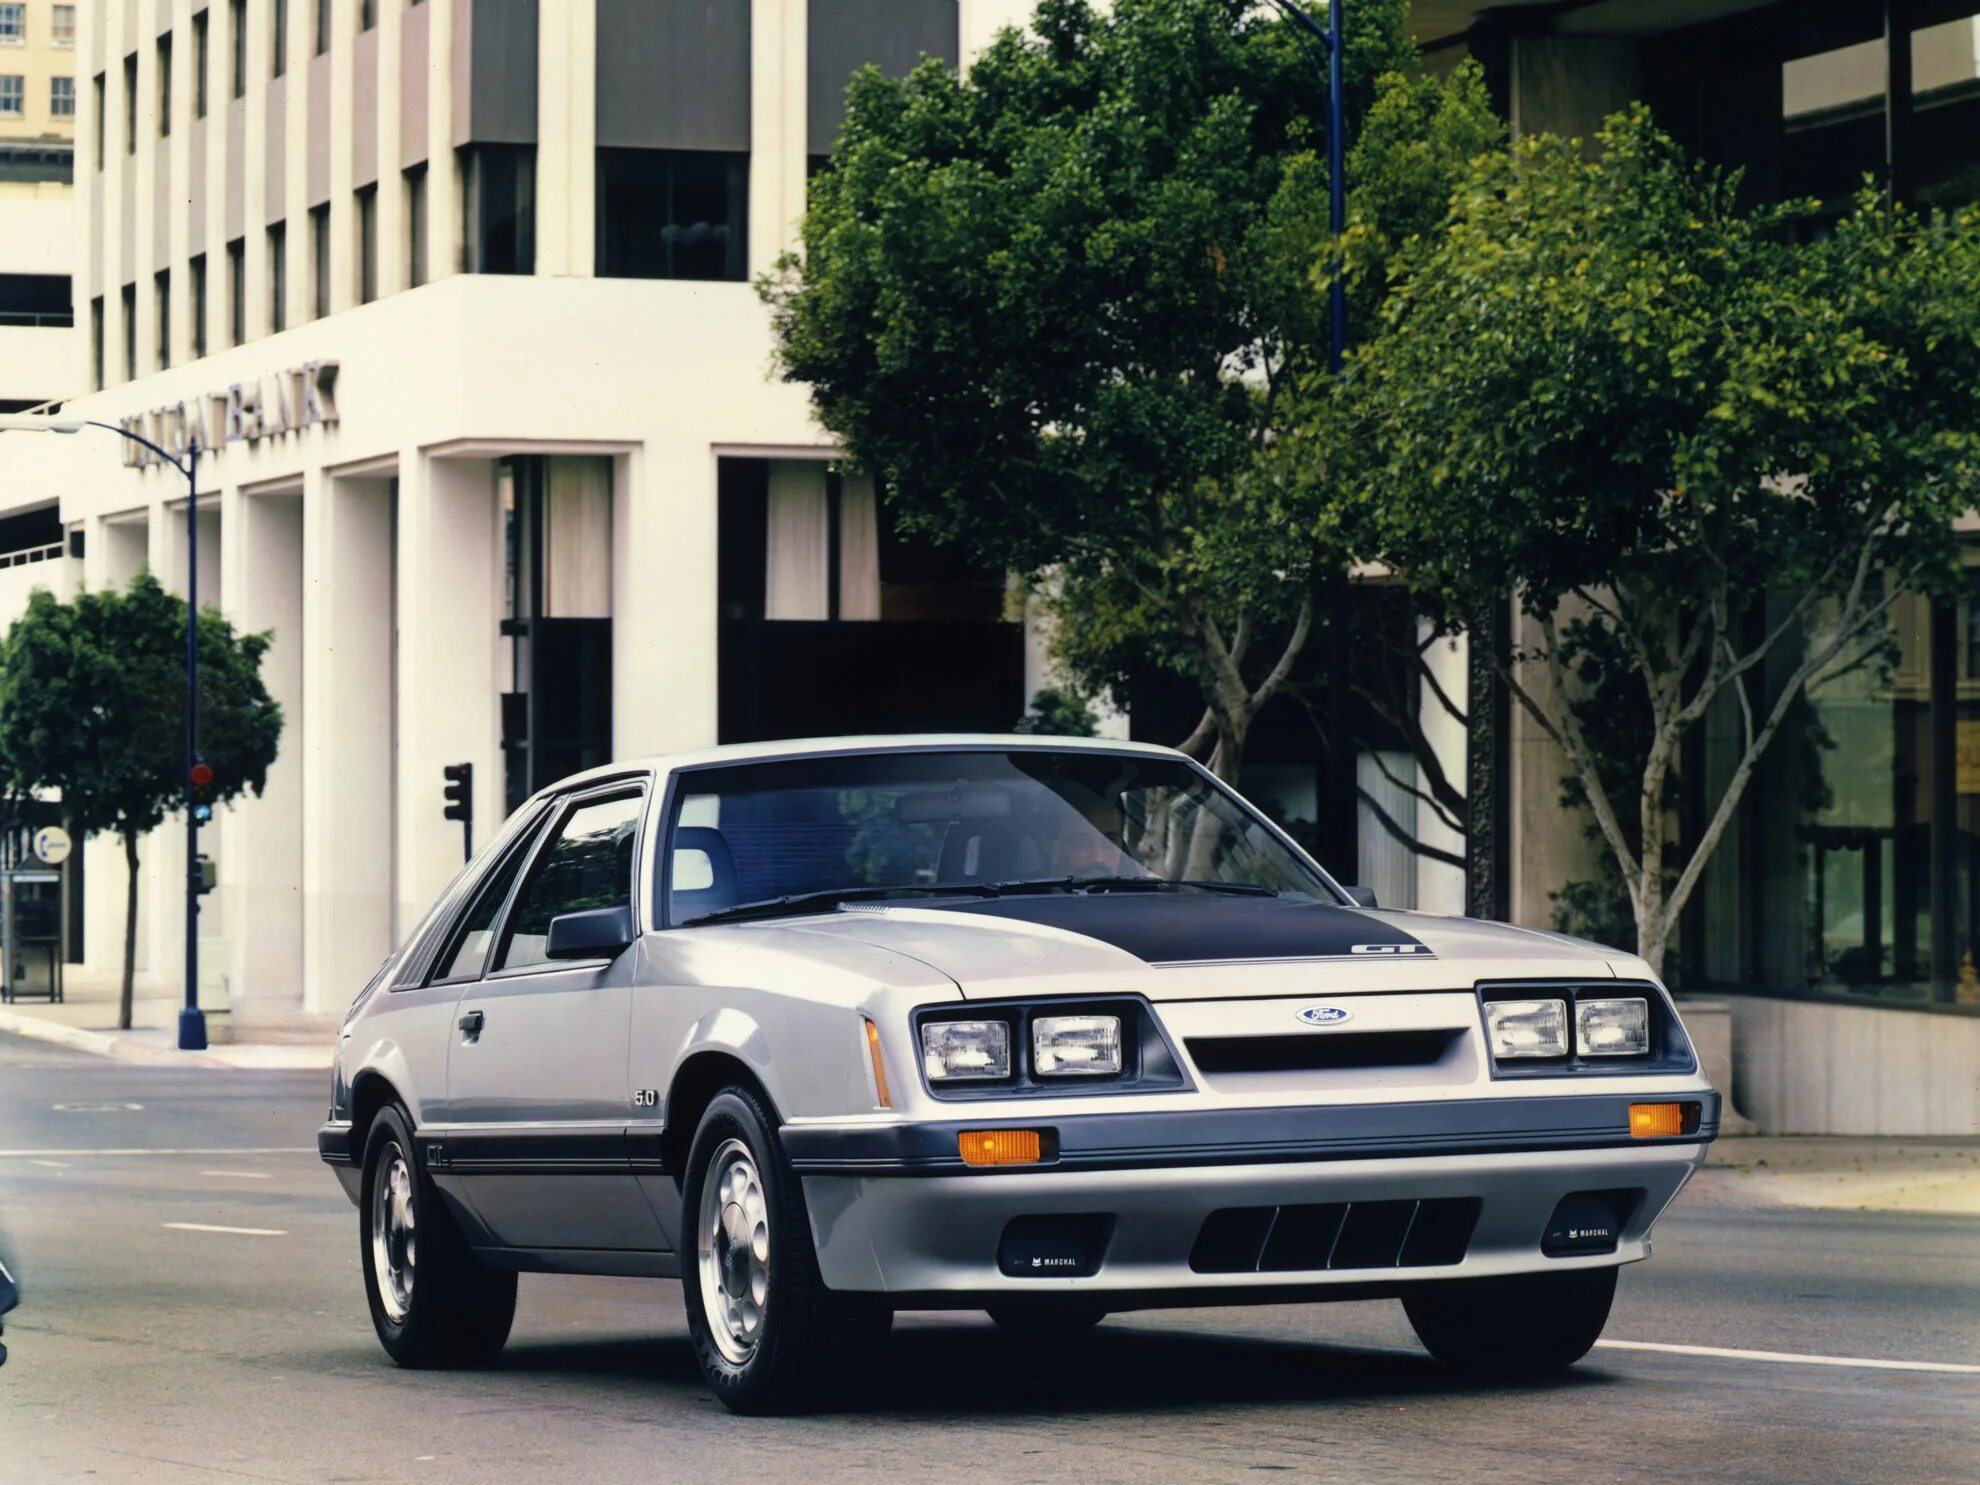 Мустанг 1983. Ford Mustang 1986. Ford Mustang gt 1986. 1986 Mustang gt. Форд Мустанг 1983.